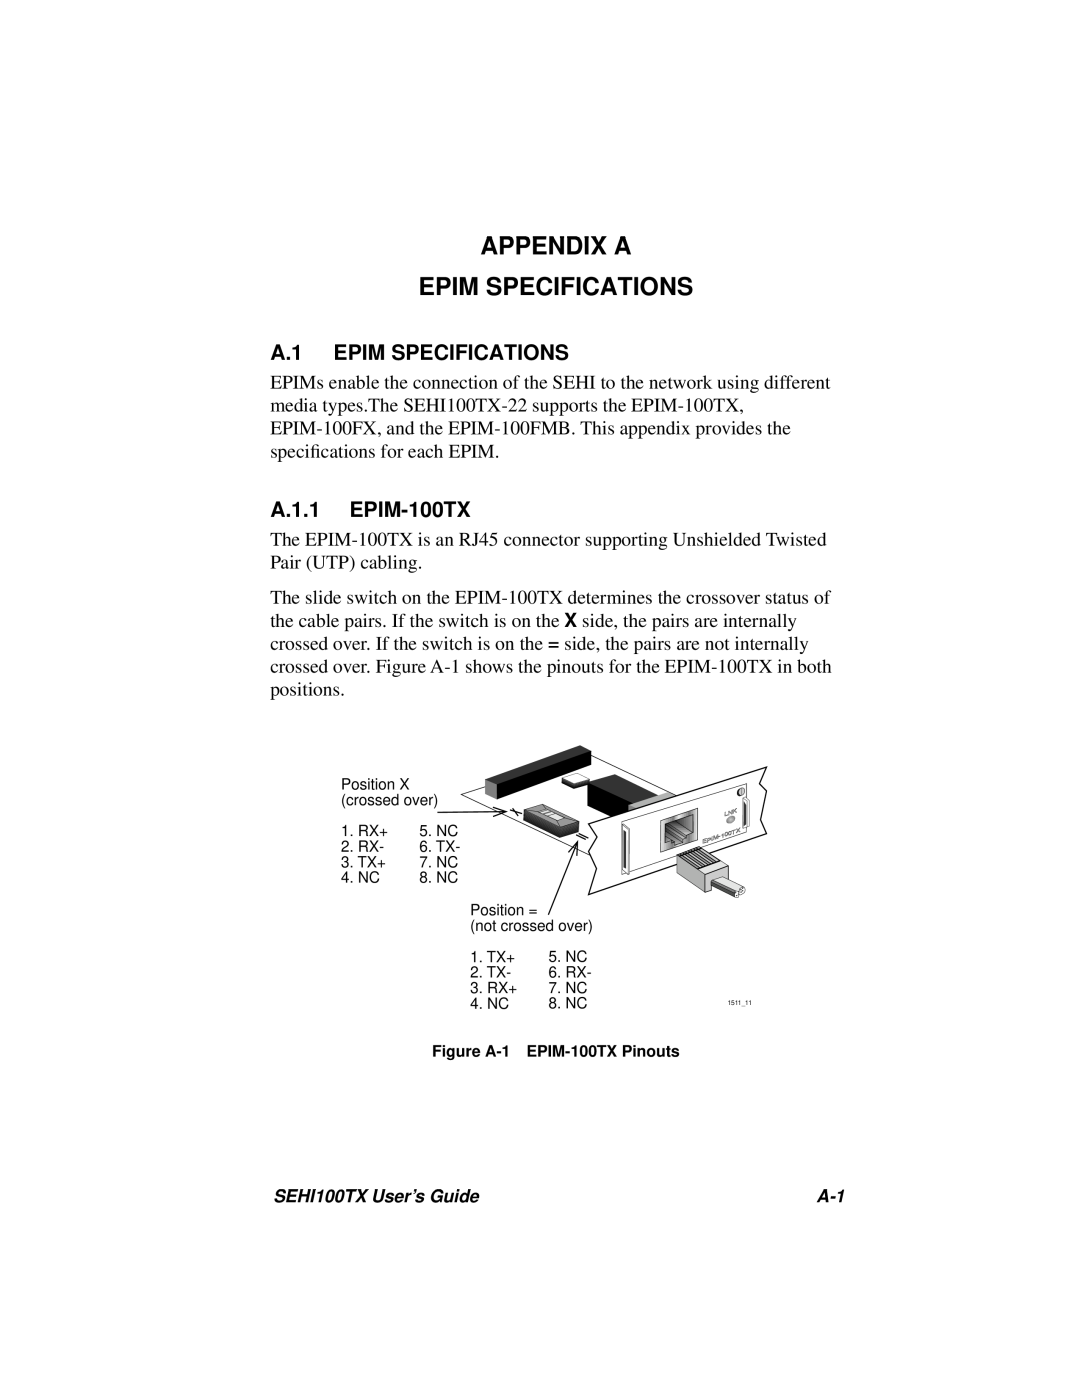 Cabletron Systems SEHI100TX-22 manual Appendix A Epim Specifications, A.1 EPIM SPECIFICATIONS, A.1.1 EPIM-100TX 